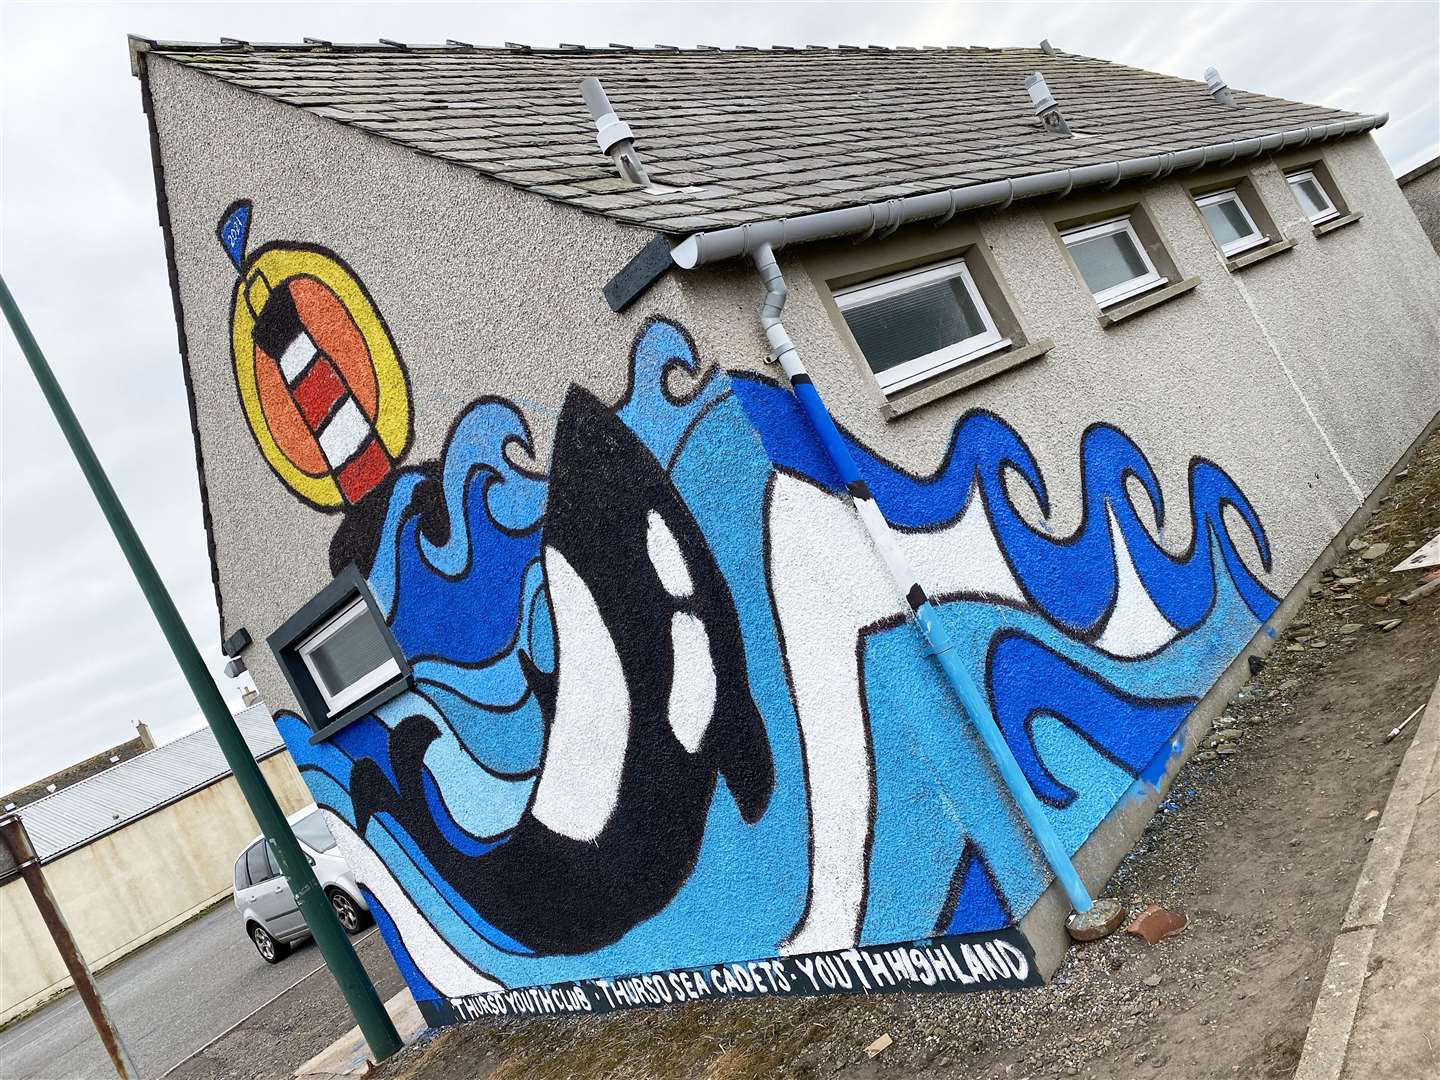 The completed mural with an orca as its centrepiece. It was created by Thurso sea cadets and members of Thurso Youth Club, supported by Youth Highland.